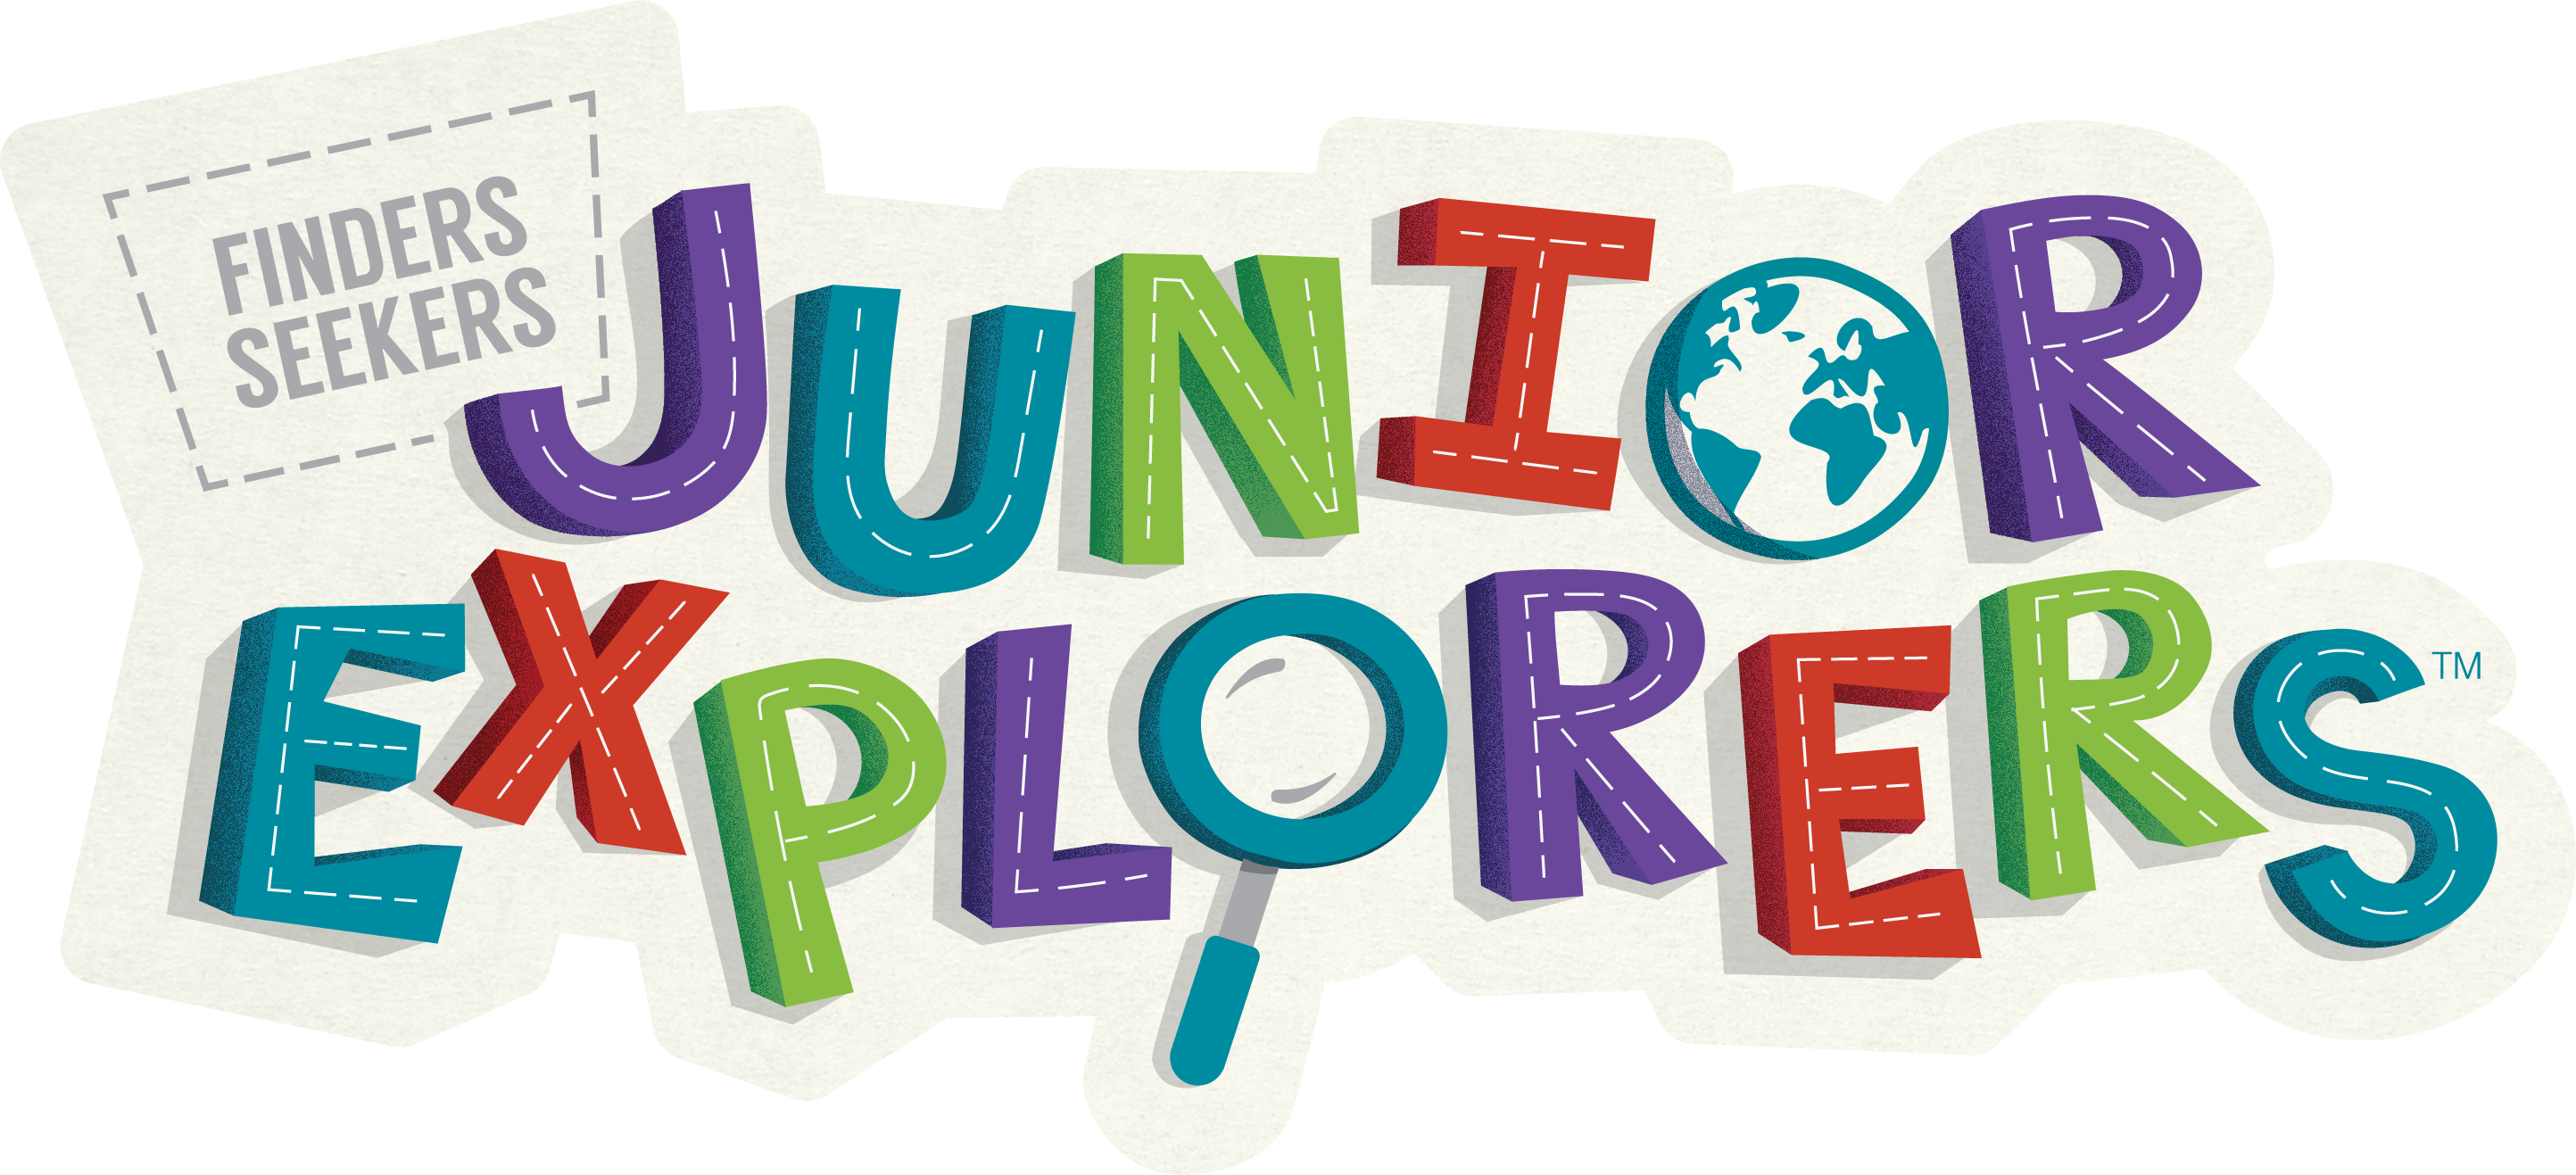 A colorful cut-out logo that reads "Finders Seekers Junior Explorers"